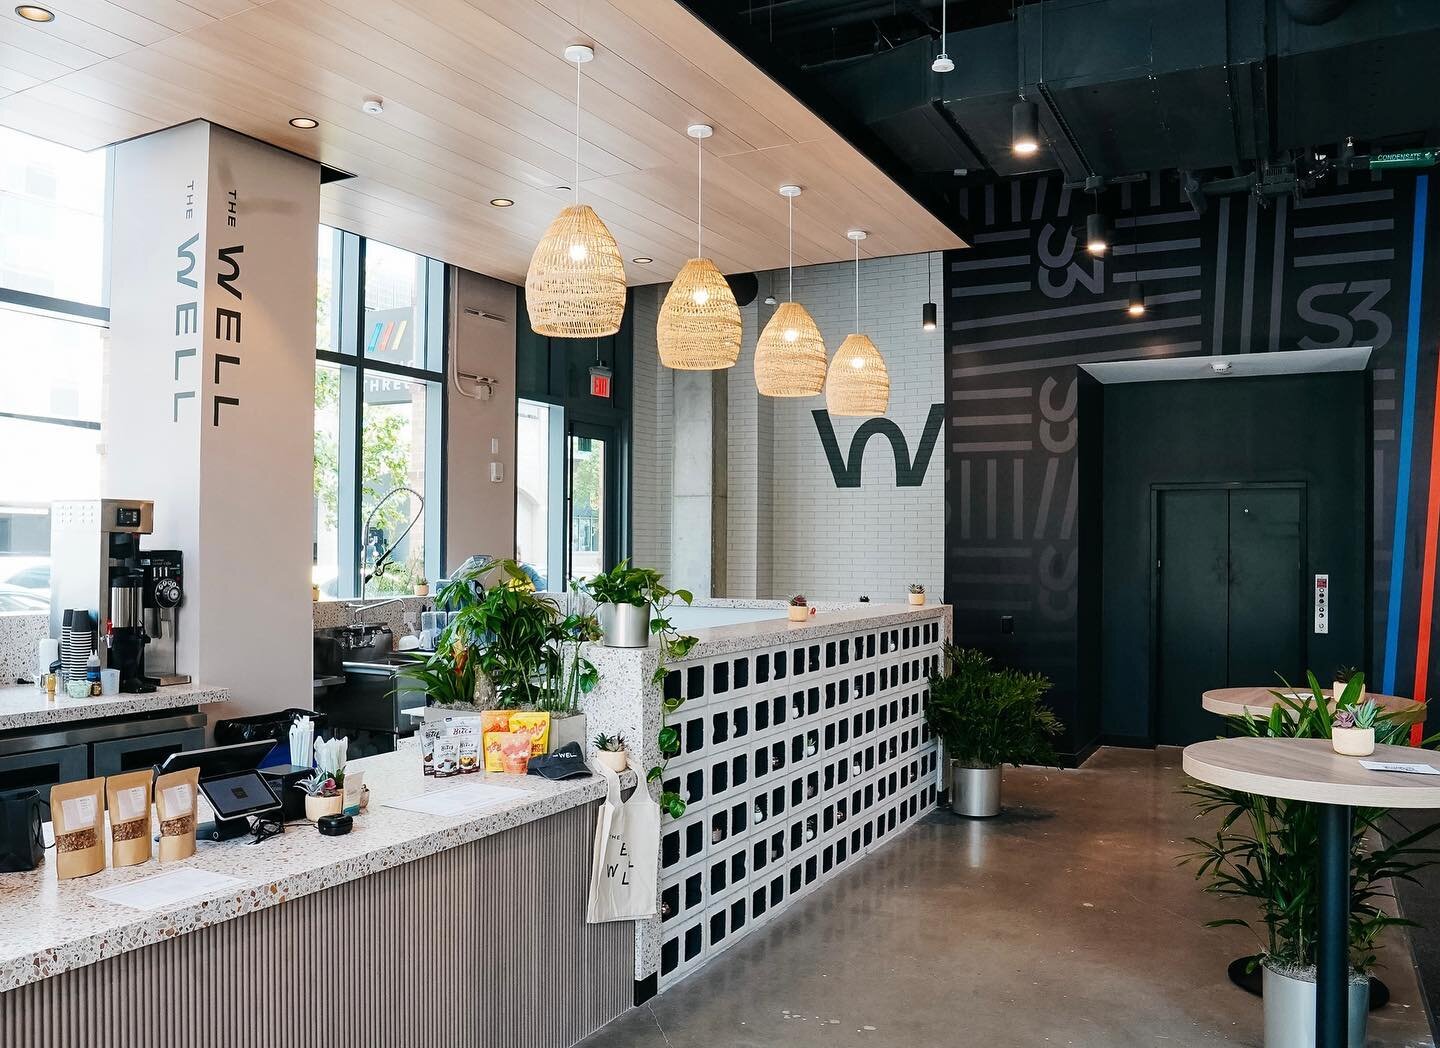 We have exciting news! Introducing Nova&rsquo;s newest location, The Well Cafe. Located inside Studio 3 &mdash; on the corner of 5th and Brazos.

We are proud to offer a menu of grab-n-gos, juices and smoothies that are completely free of gluten, see